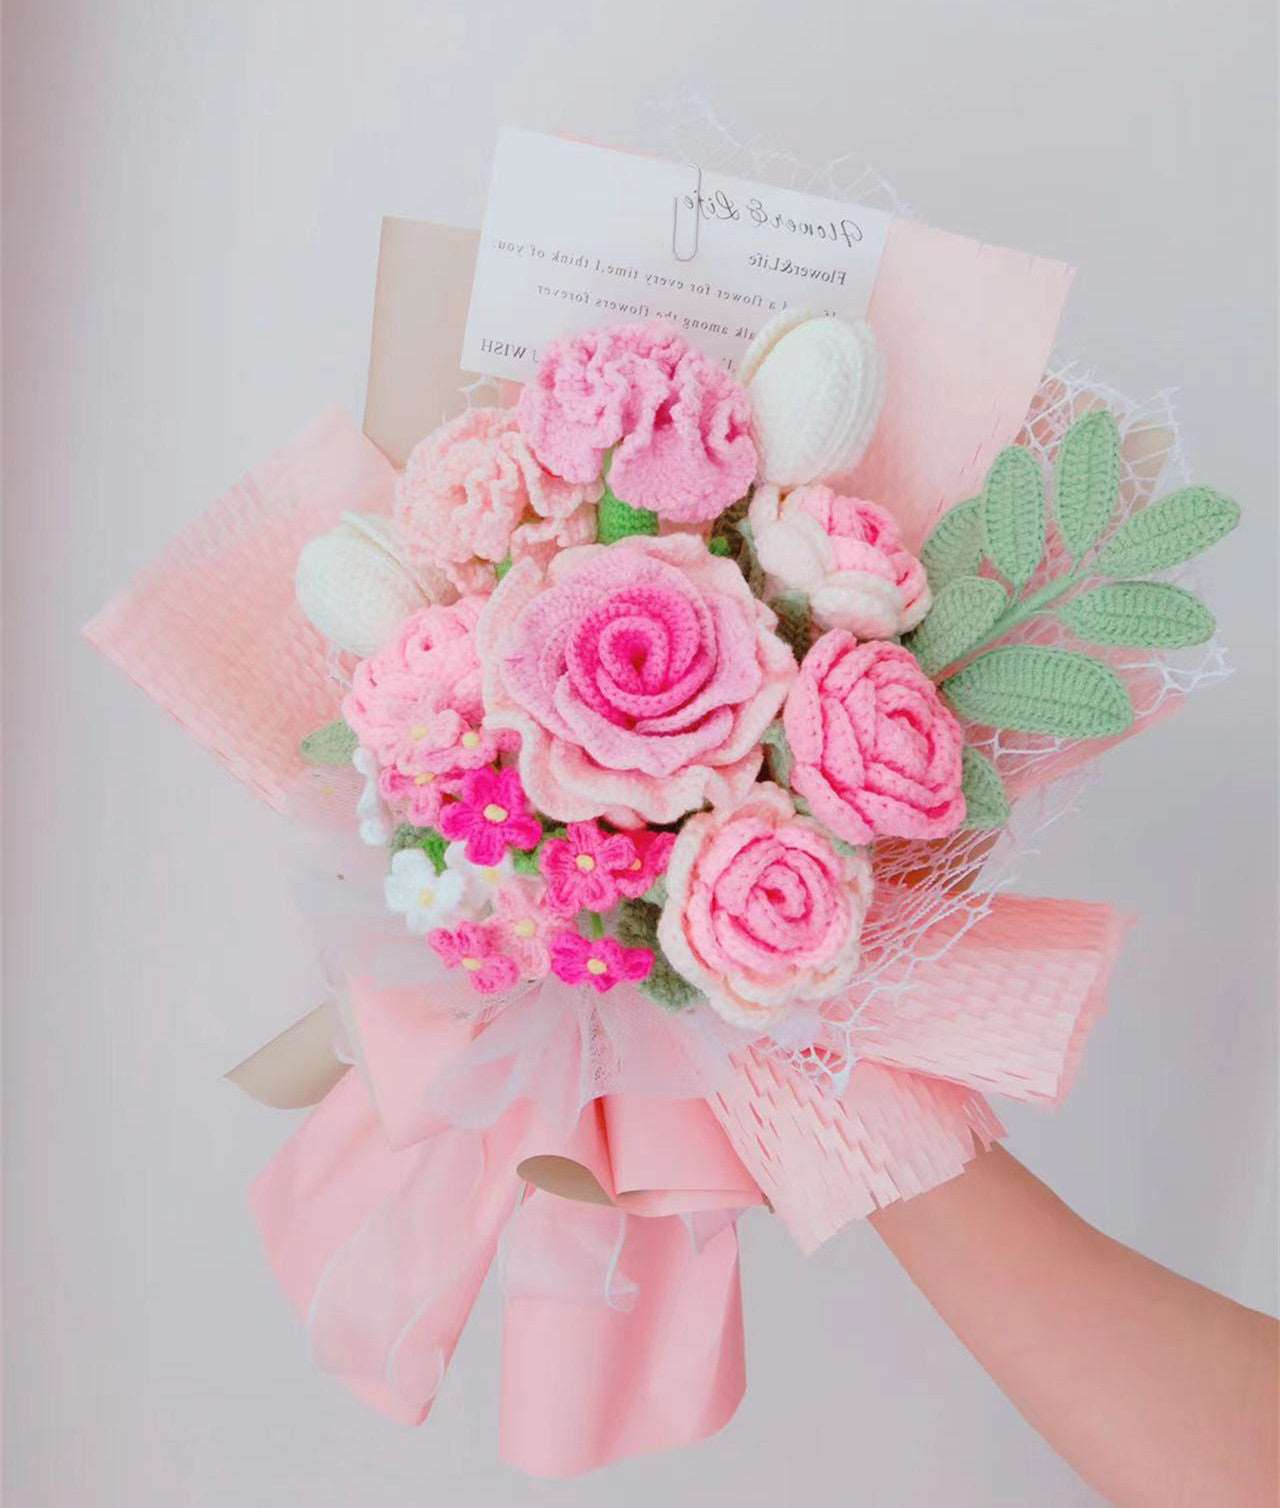 Crochet Bouquet with White and Pink Flowers